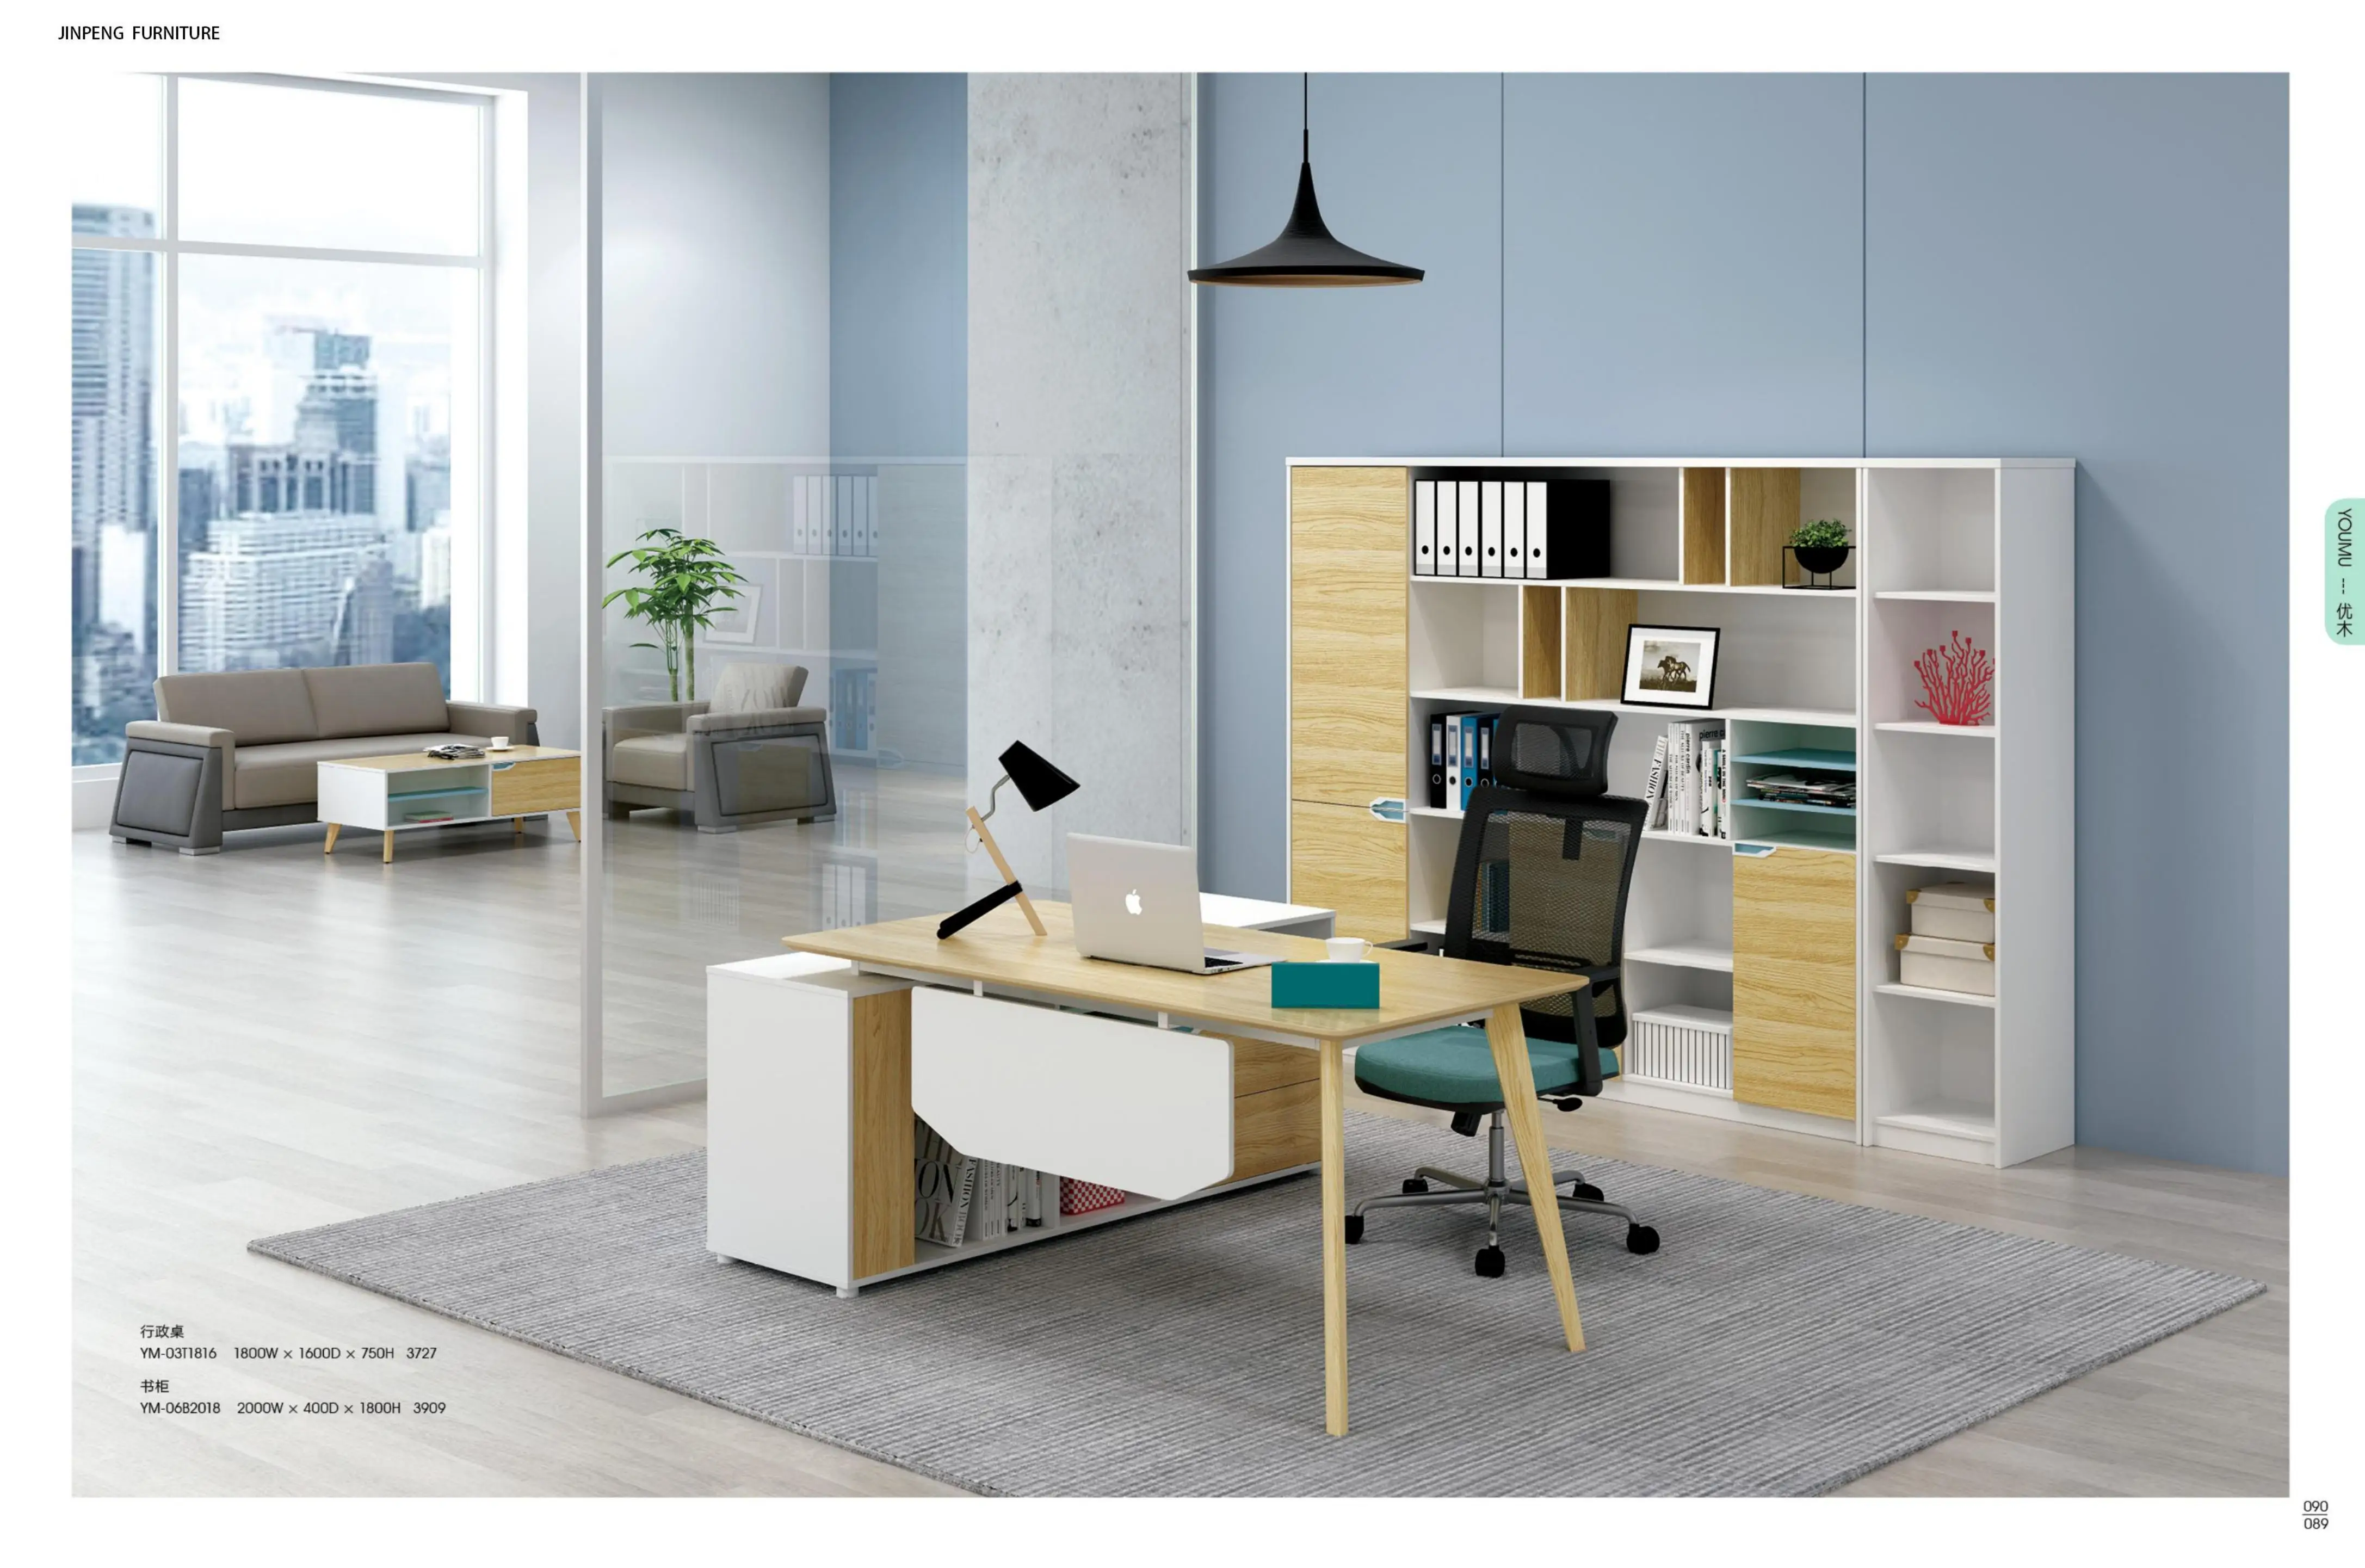 Adding Personality to Your Workspace: The Beauty of a Painted Office Desk